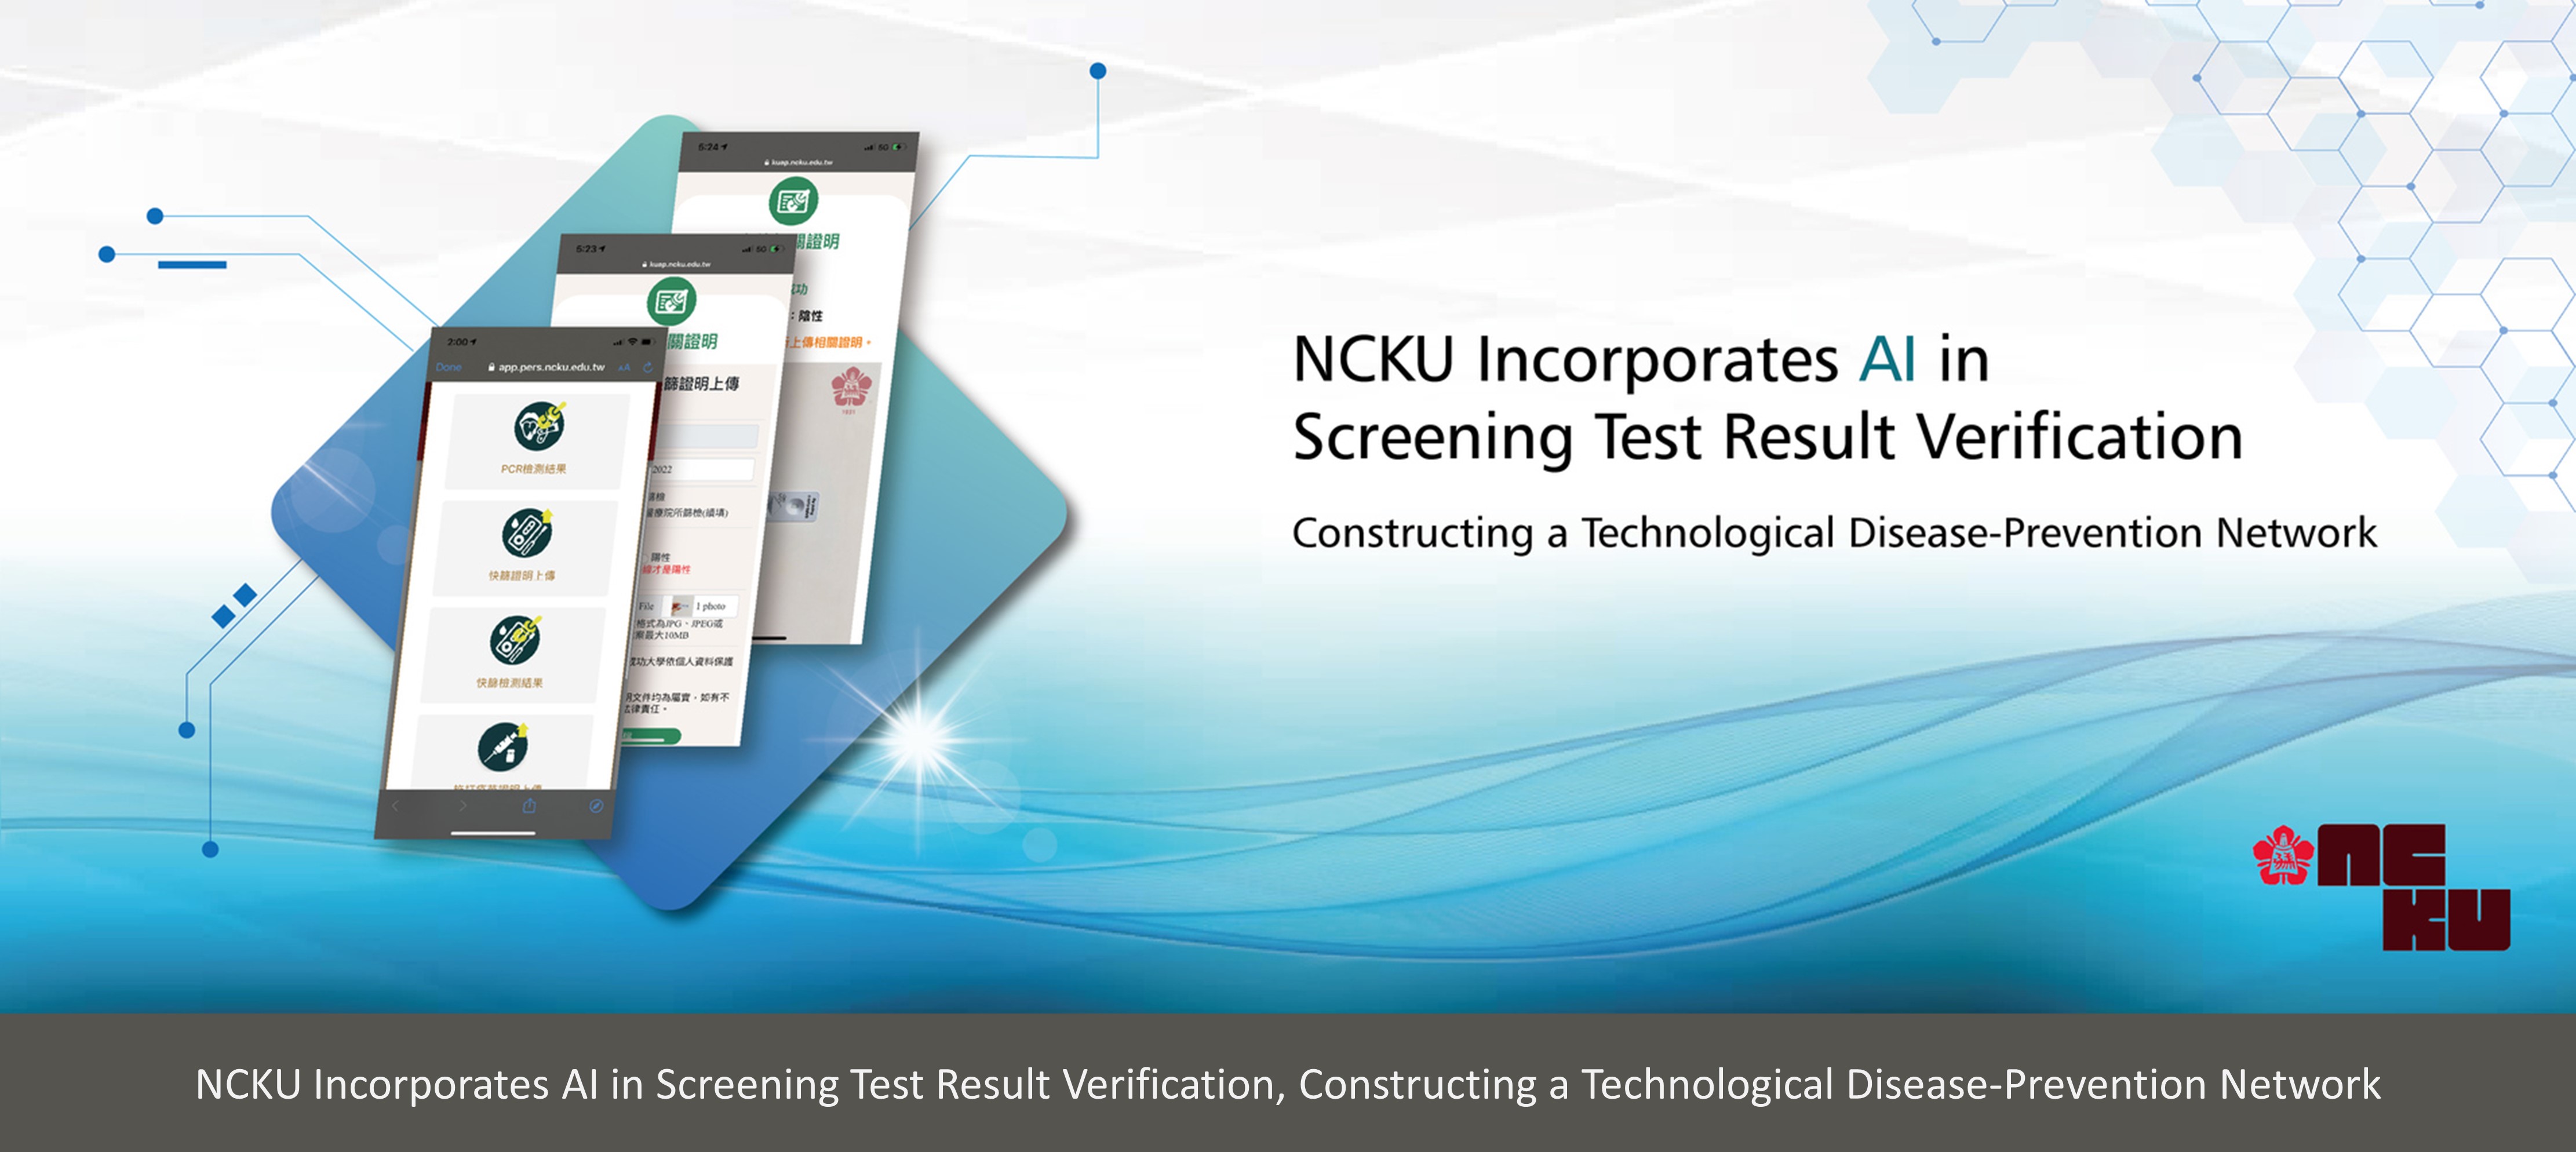 NCKU Incorporates AI in Screening Test Result Verification, Constructing a Technological Disease-Prevention Network